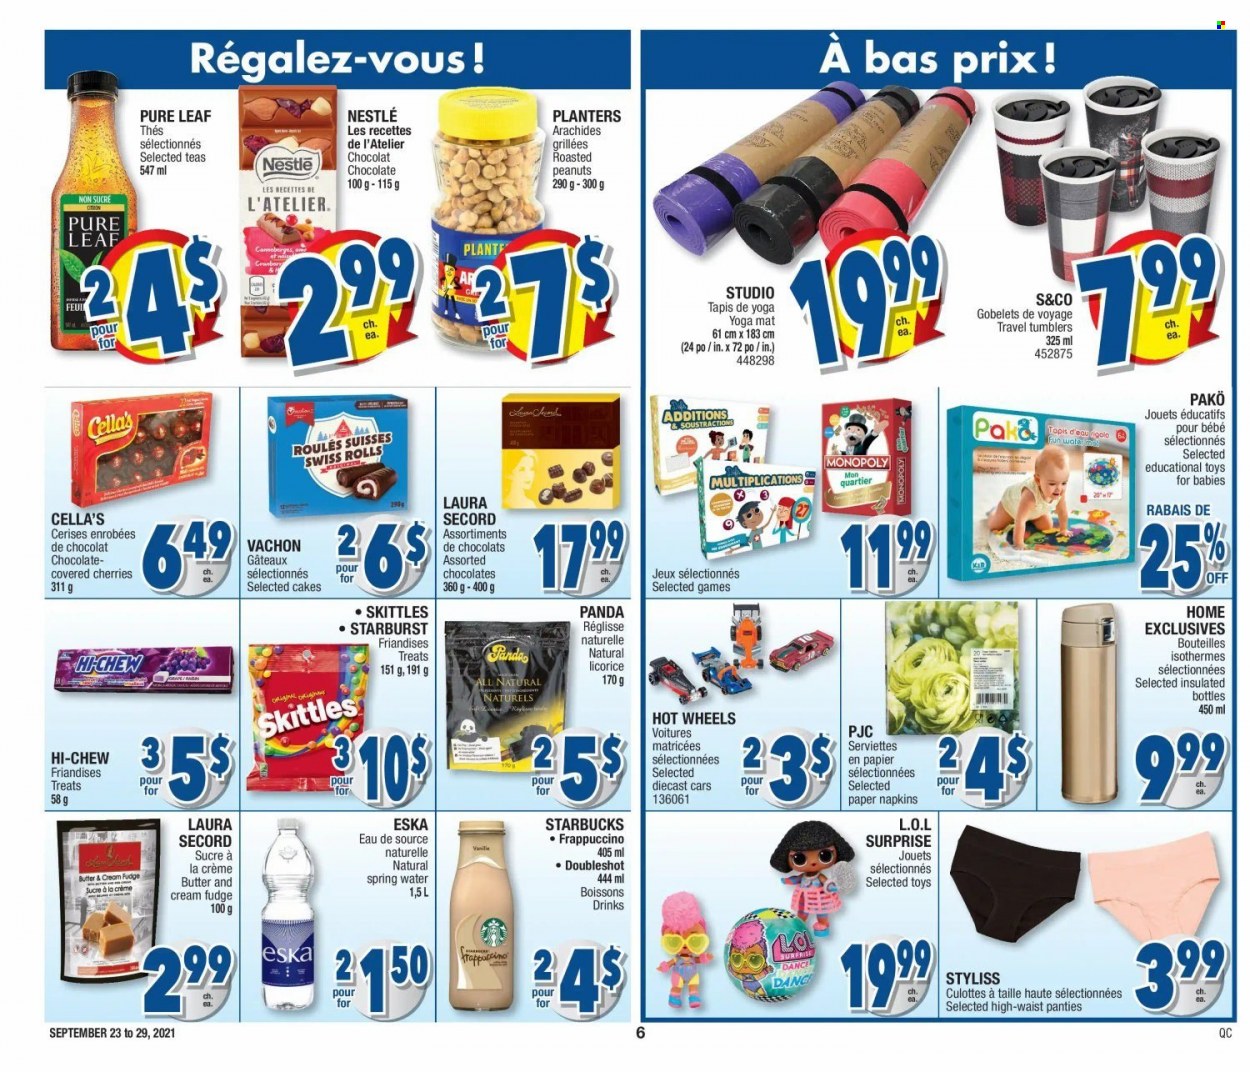 thumbnail - Jean Coutu Flyer - September 23, 2021 - September 29, 2021 - Sales products - fudge, chocolate, cake, Skittles, Starburst, peanuts, Planters, spring water, Pure Leaf, Starbucks, frappuccino, napkins, tumbler, paper, Monopoly, toys, panda, Nestlé, Hot Wheels, panties. Page 7.